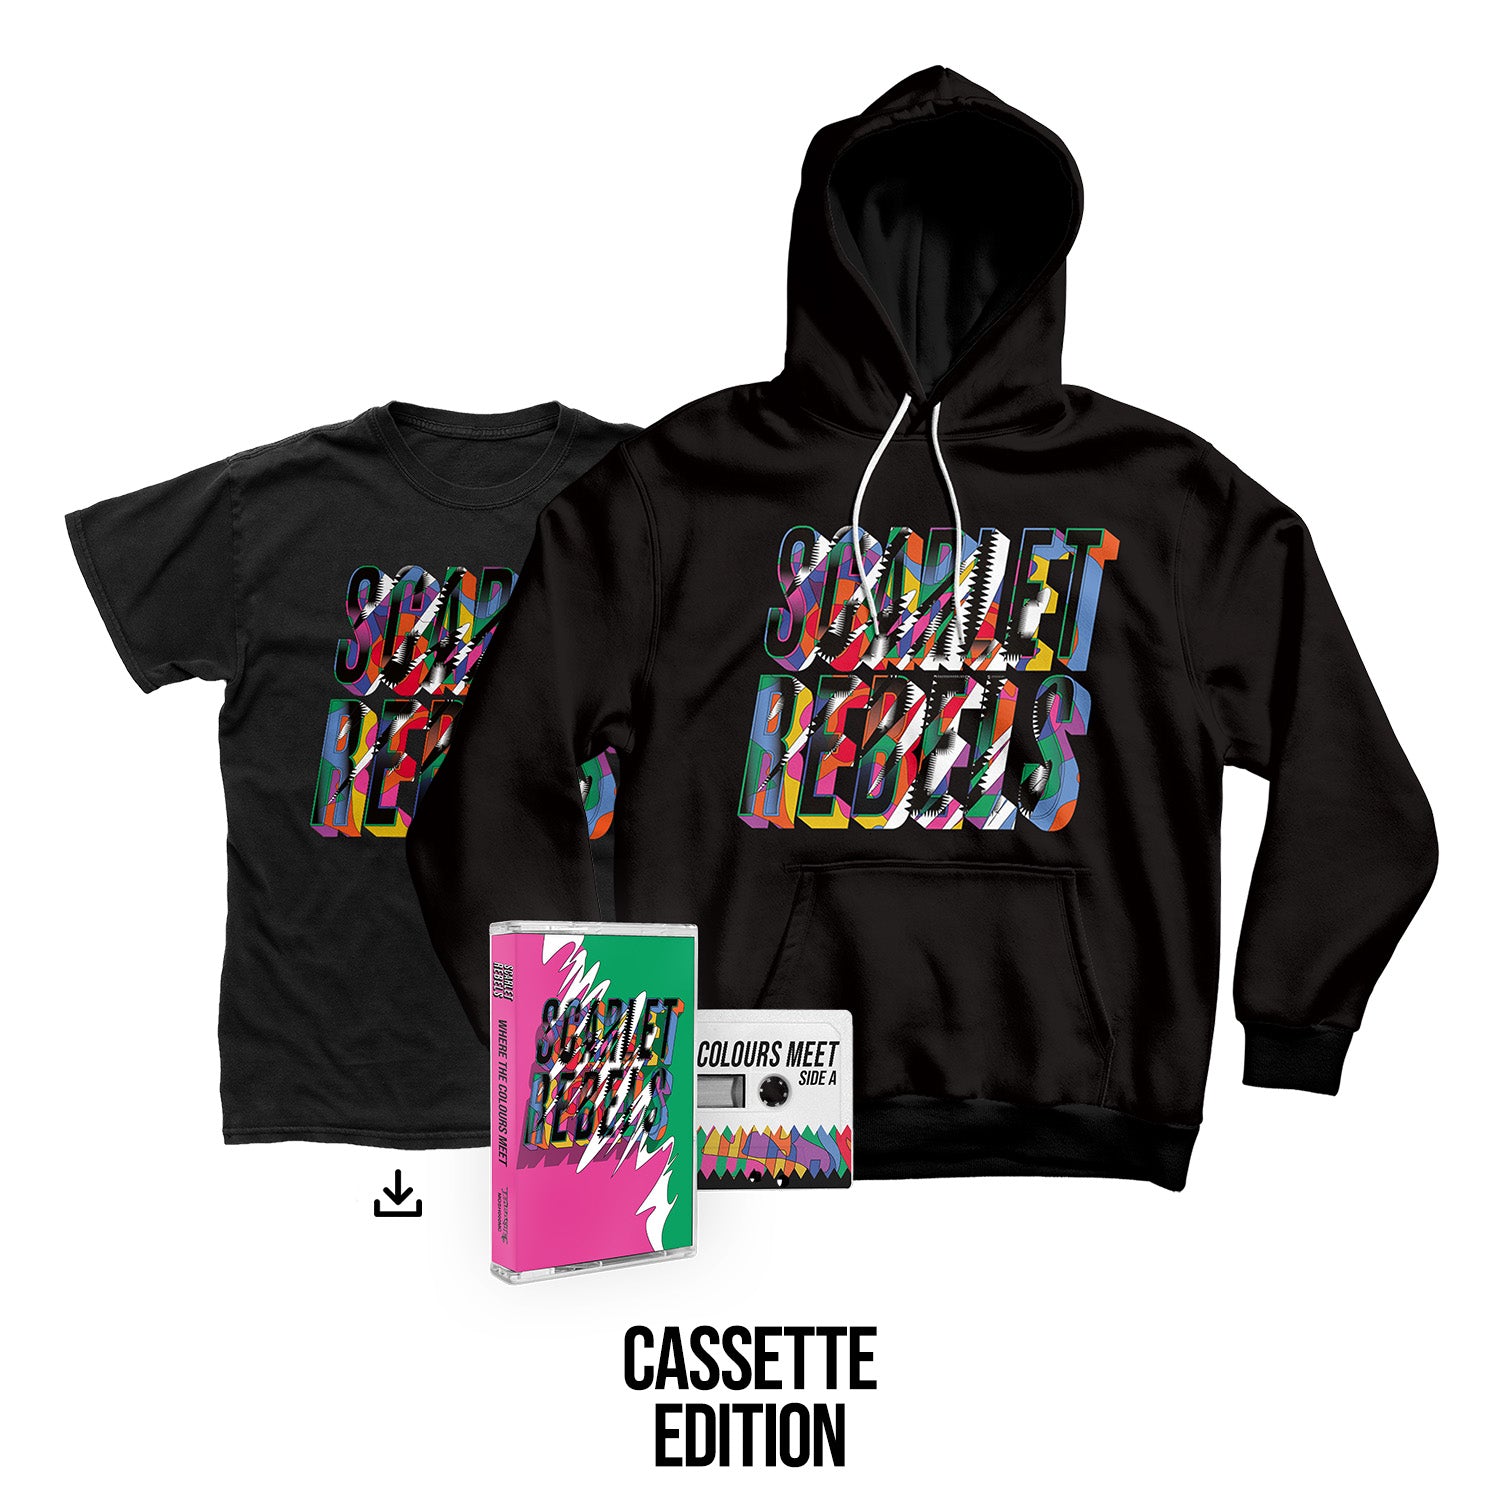 Scarlet Rebels "Where The Colours Meet" Cassette Tape, T shirt, Hoodie & Download - PRE-ORDER